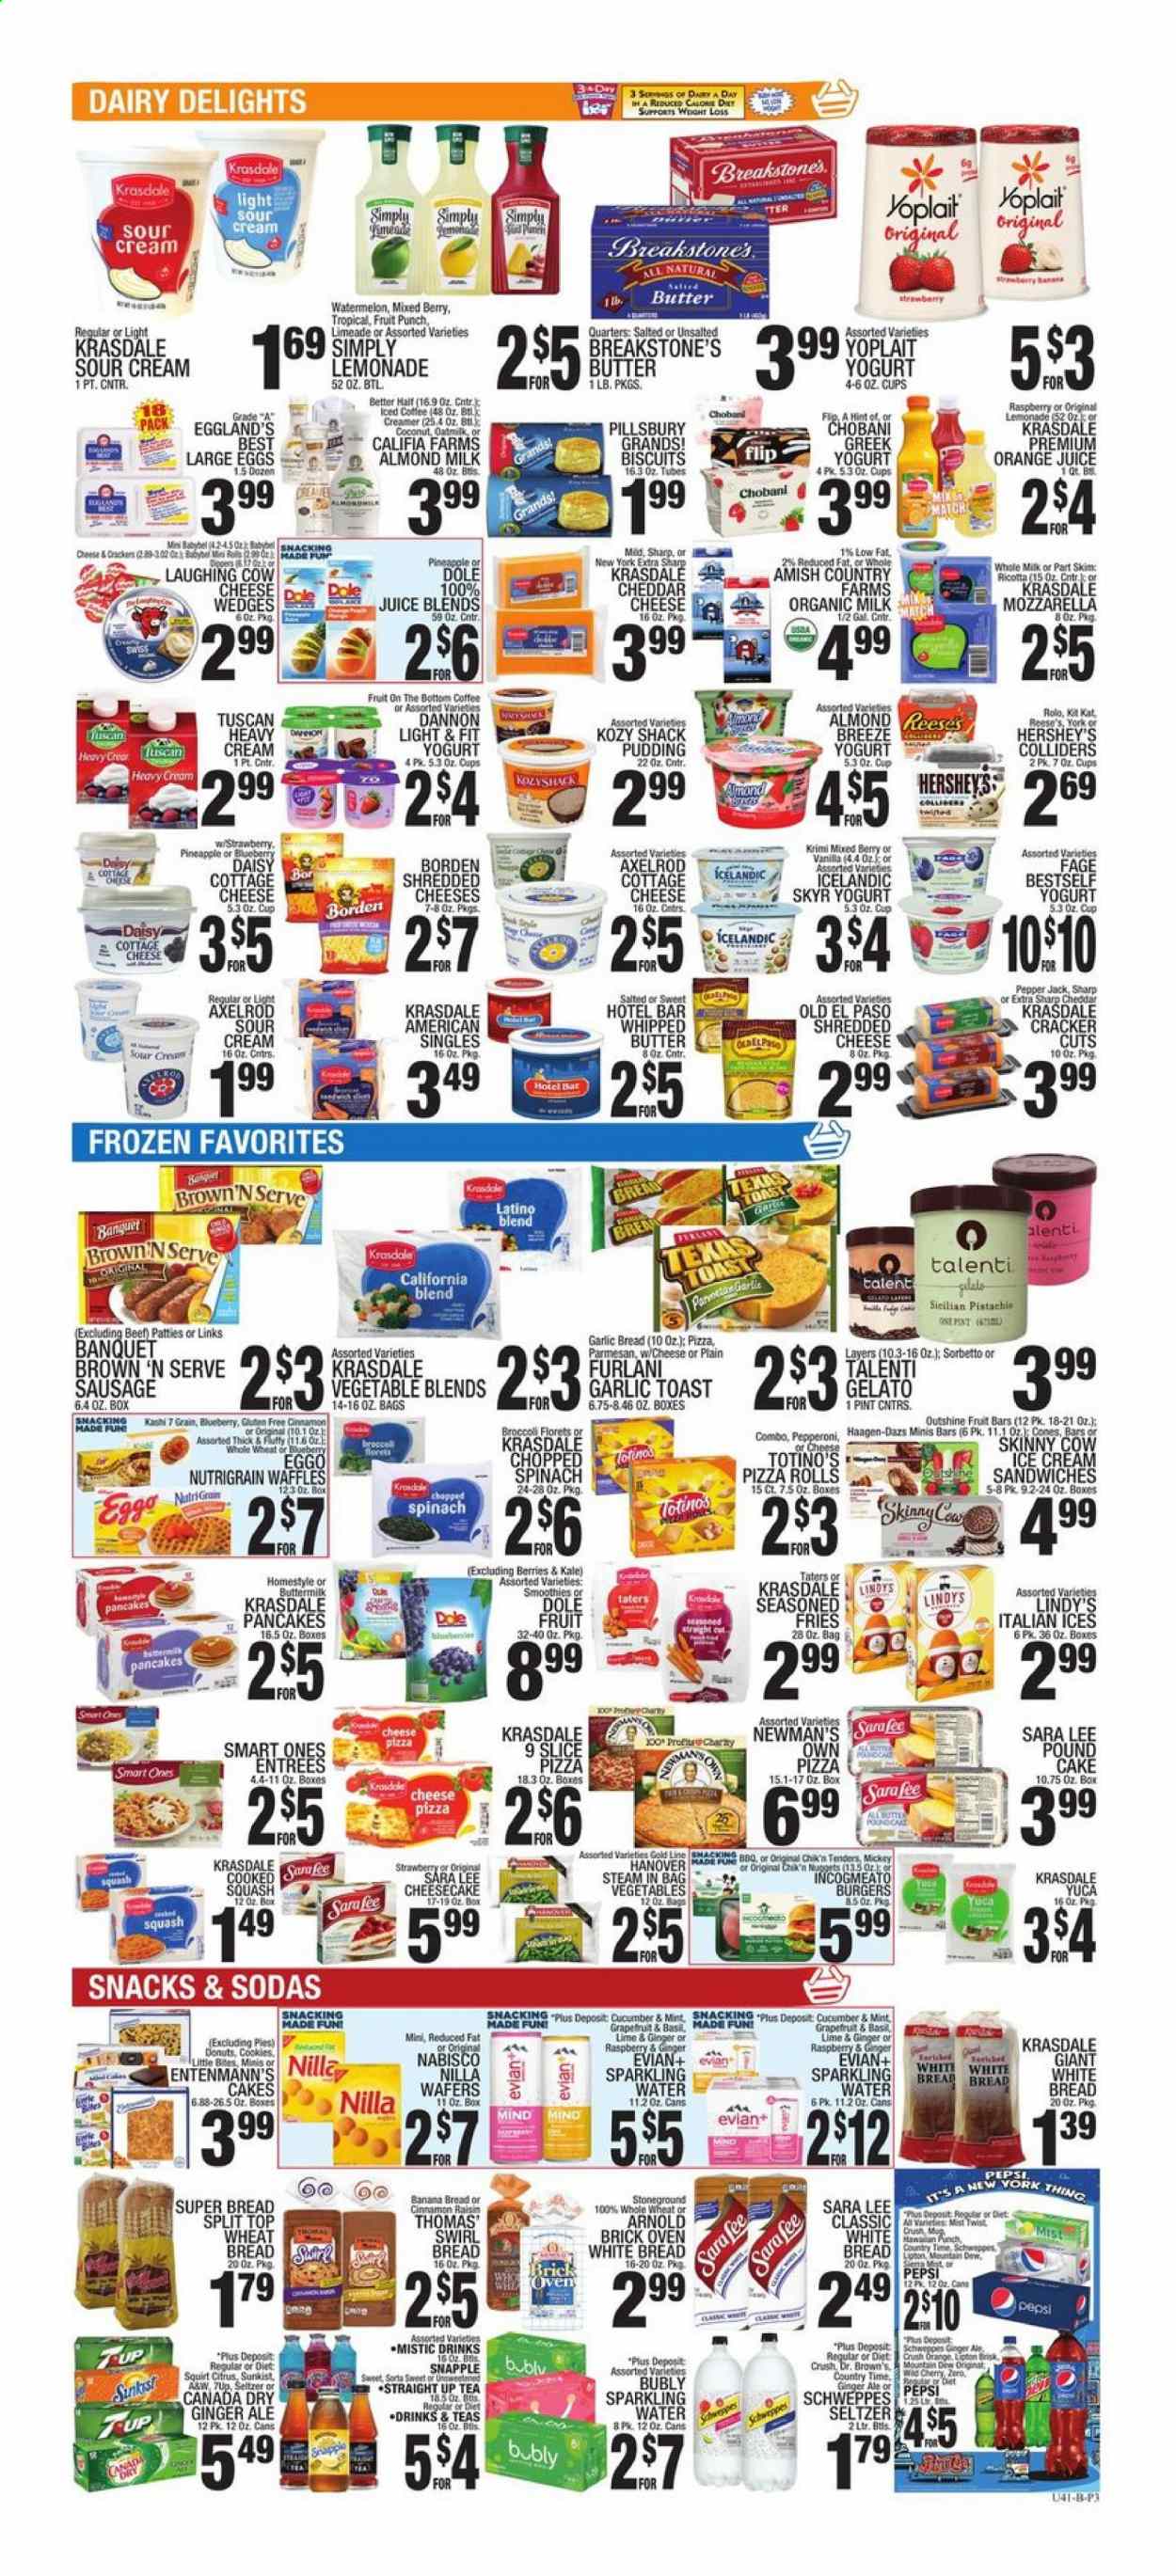 thumbnail - C-Town Flyer - 06/11/2021 - 06/17/2021 - Sales products - wheat bread, white bread, cake, pizza rolls, Old El Paso, Sara Lee, donut, banana bread, pound cake, Entenmann's, broccoli, Dole, watermelon, cherries, coconut, pizza, nuggets, hamburger, pancakes, Pillsbury, sausage, pepperoni, Brown 'N Serve, cottage cheese, ricotta, shredded cheese, cheddar, parmesan, Pepper Jack cheese, The Laughing Cow, Babybel, greek yoghurt, pudding, yoghurt, Yoplait, Chobani, Dannon, almond milk, buttermilk, organic milk, oat milk, large eggs, whipped butter, sour cream, creamer, ice cream, ice cream sandwich, Reese's, Hershey's, Häagen-Dazs, Talenti Gelato, gelato, potato fries, wafers, KitKat, crackers, biscuit, Little Bites, Canada Dry, ginger ale, lemonade, Mountain Dew, Schweppes, Pepsi, orange juice, juice, Lipton, Diet Pepsi, 7UP, Snapple, Dr. Brown's, Country Time, fruit punch, smoothie, seltzer water, sparkling water, Evian, iced coffee, tea. Page 3.